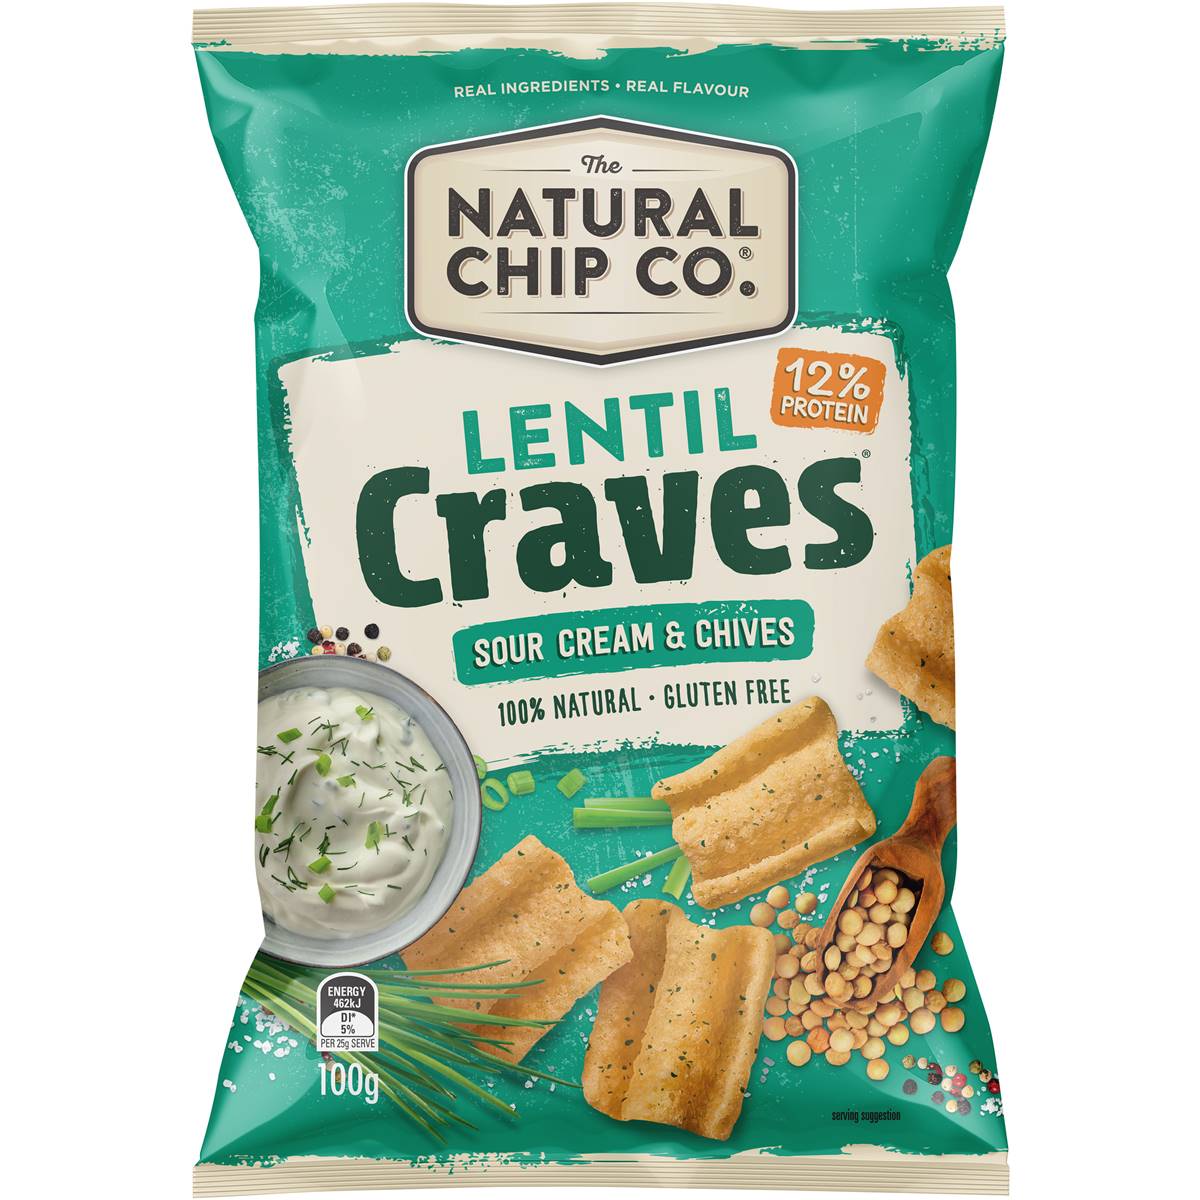 Calories in The Natural Chip Co. Lentil Craves Sour Cream & Chives